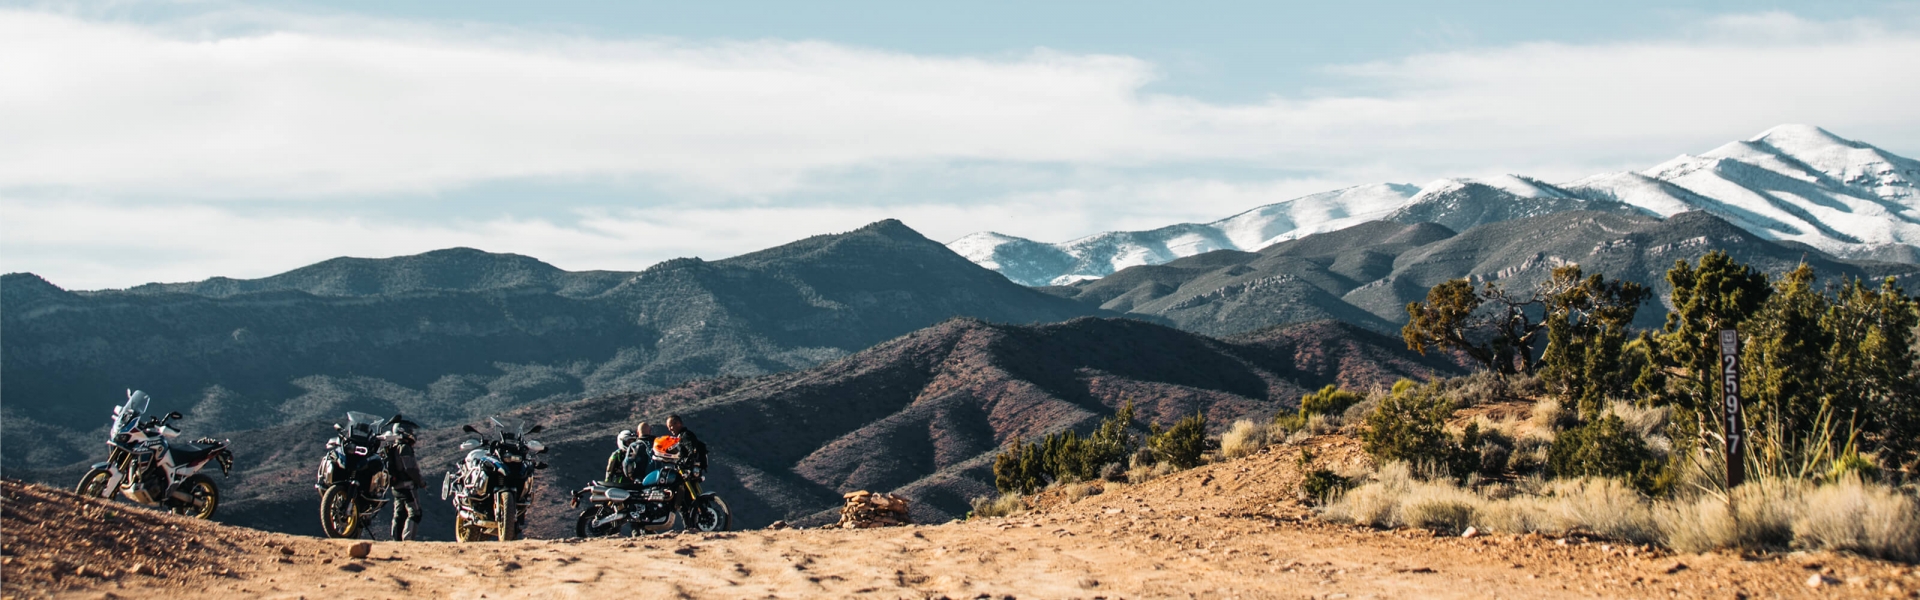 bikers with a mountain landscape backdrop